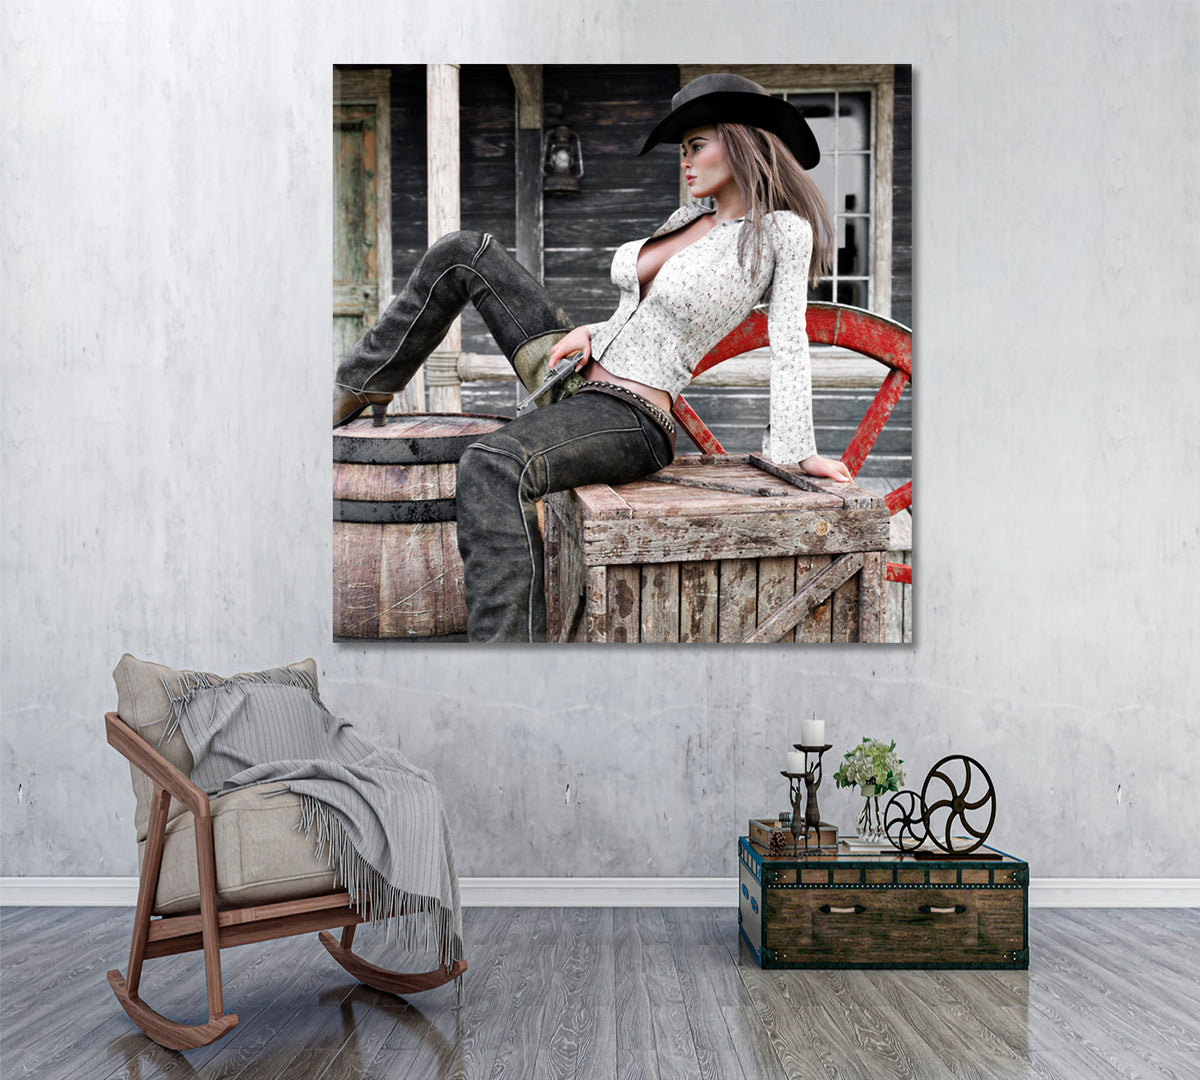 USA OLD WEST Cowgirl Vintage Affordable Canvas Print Artesty 1 Panel 12"x12" 